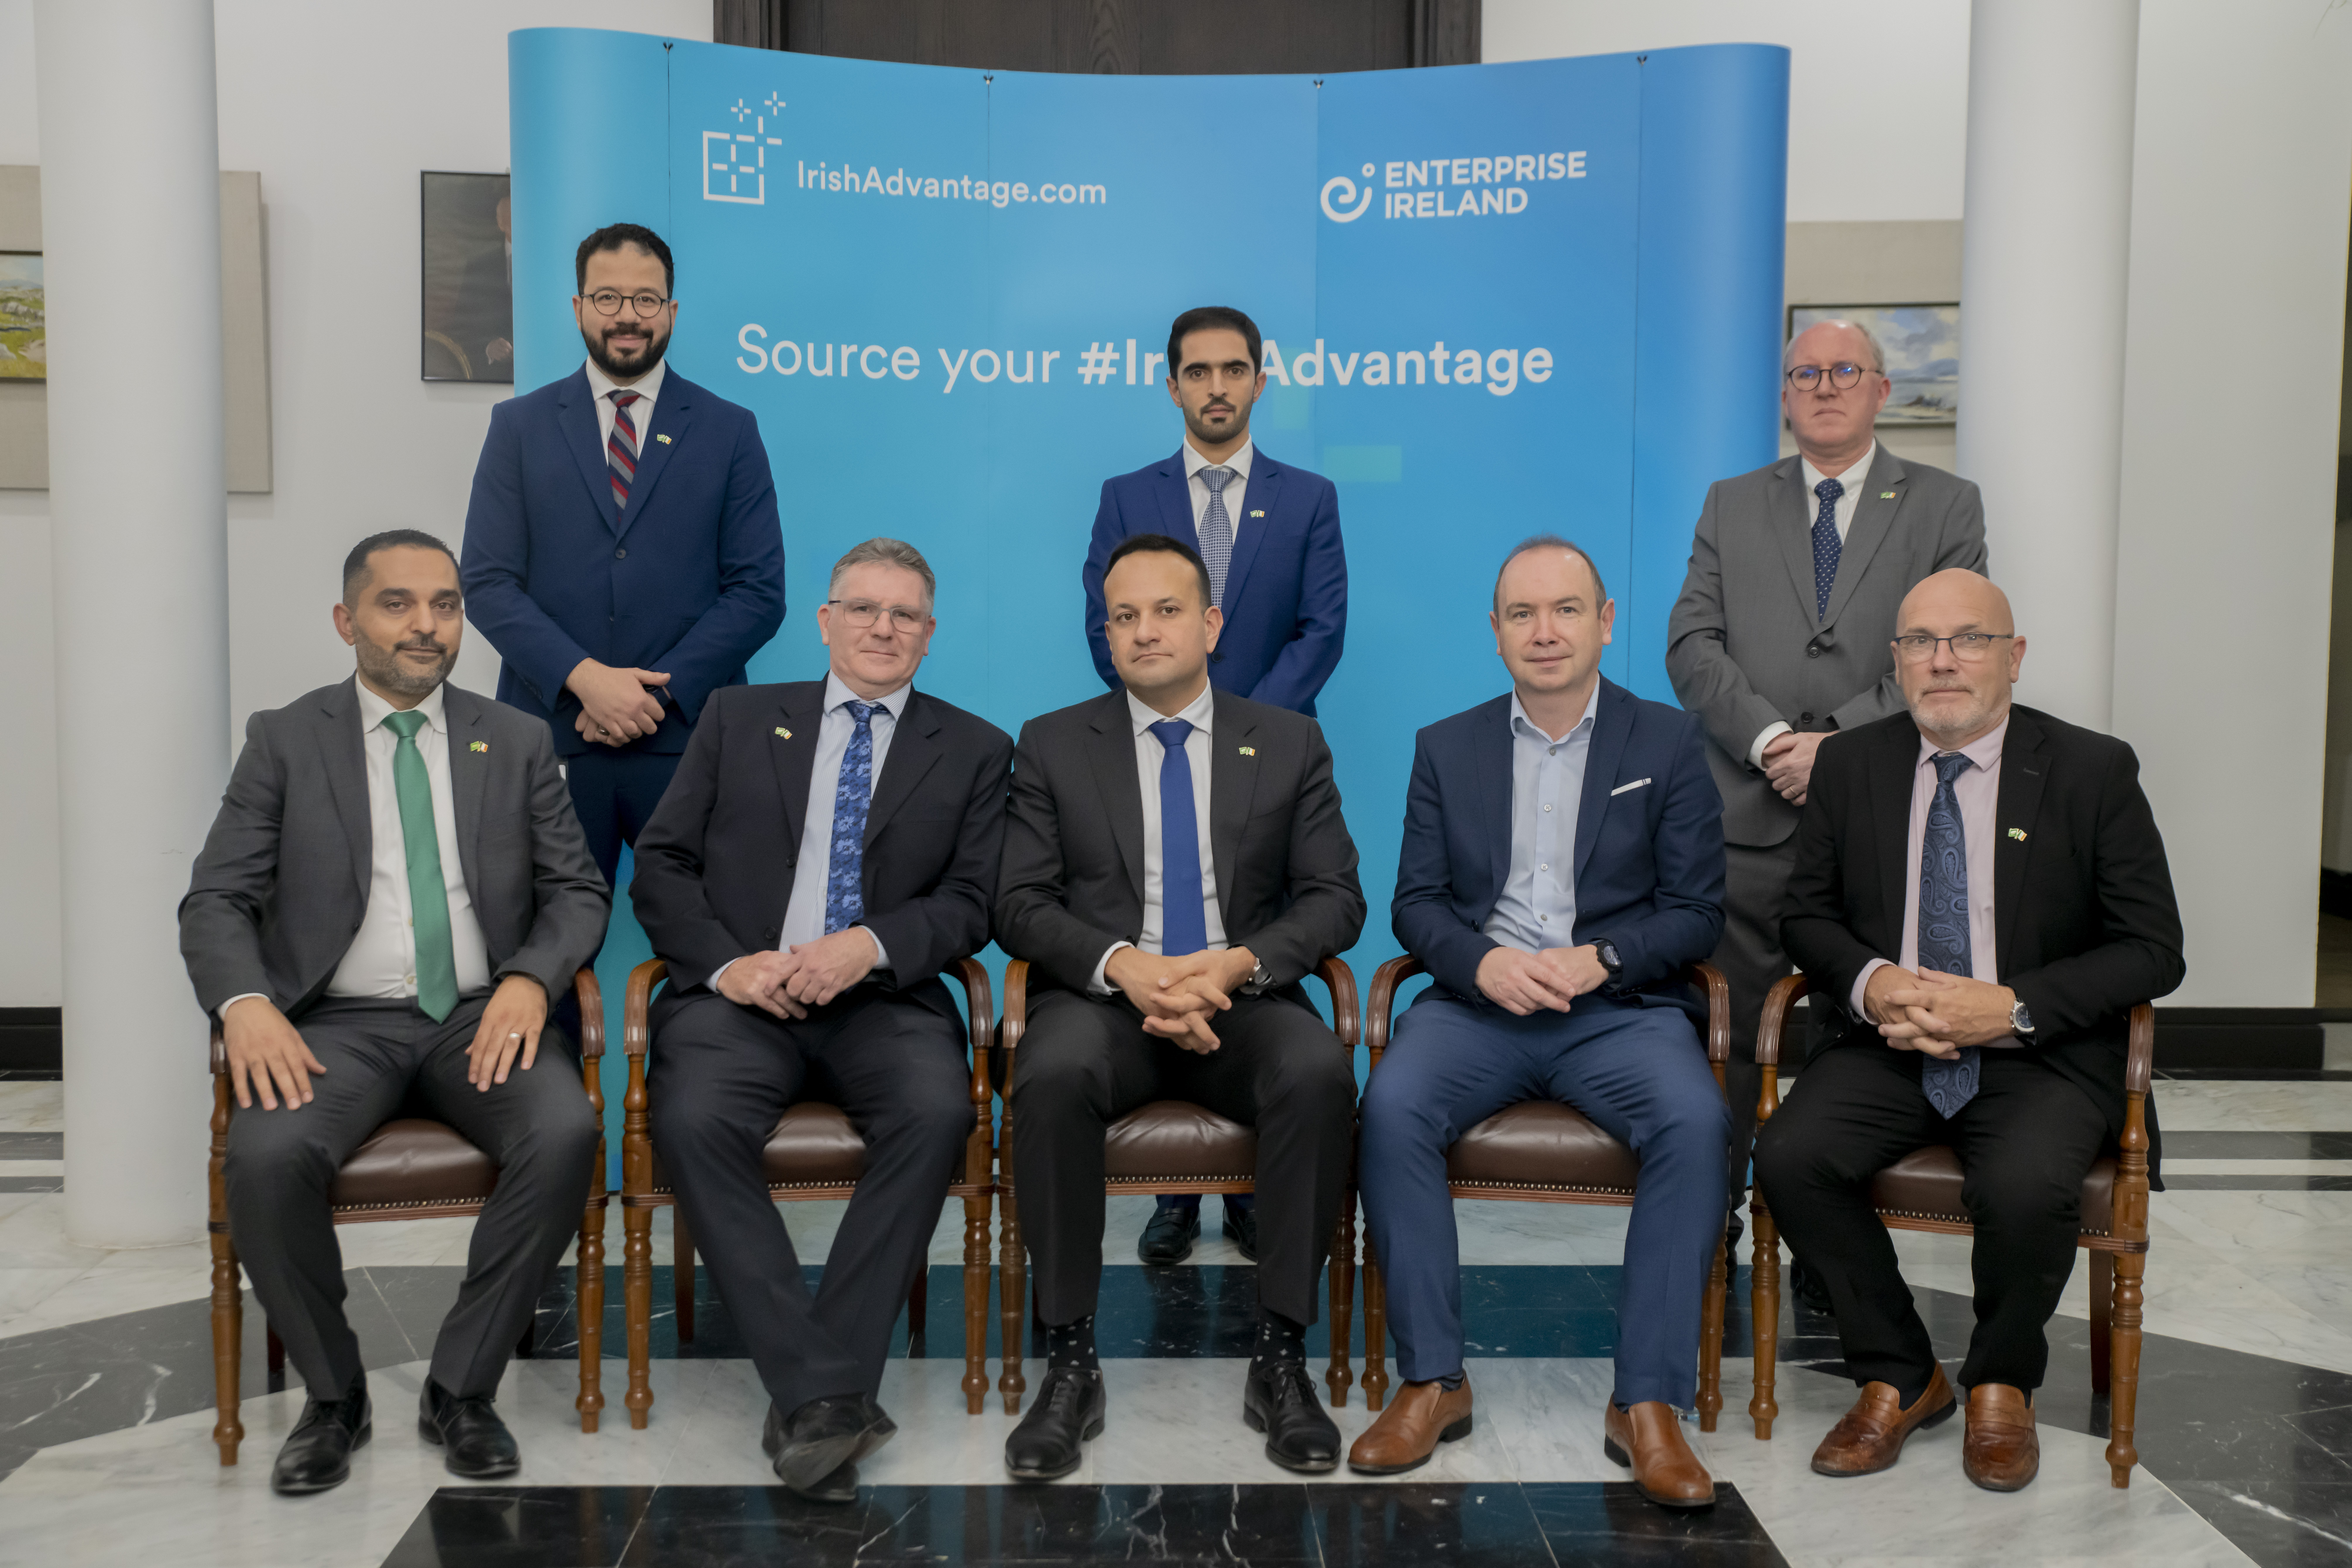 BYRNELOOBY CONTINUES ITS EXPANSION IN THE MIDDLE EAST